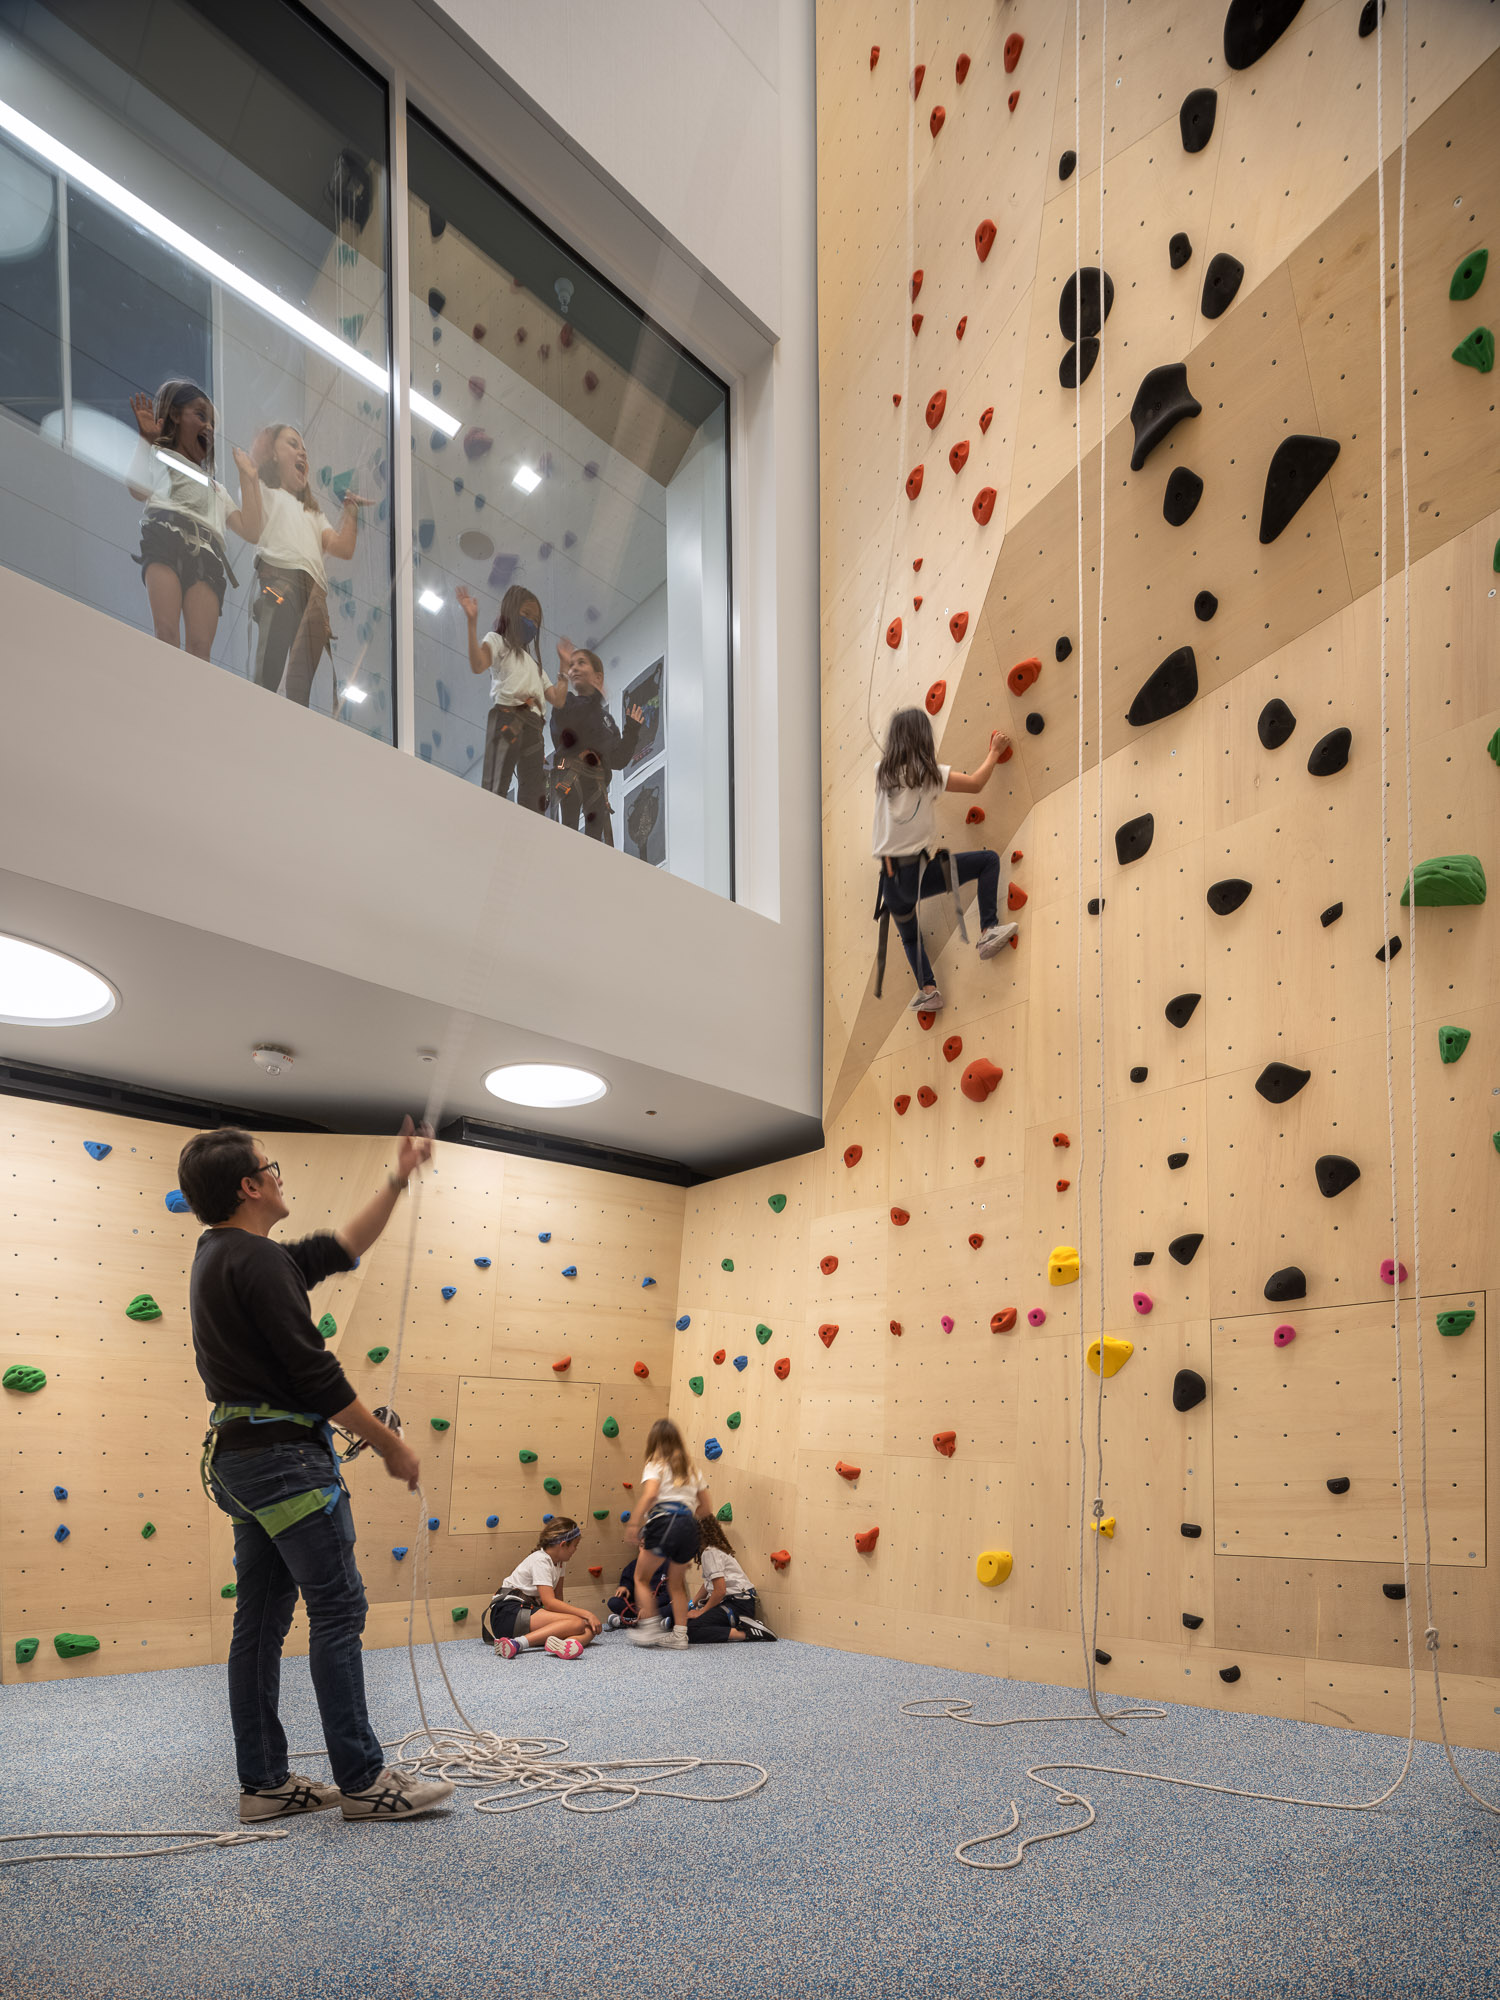 The Hamlin School, San Francisco, California ©Mike Kelley. A new climbing wall is one of the student’s favorite athletic activities.